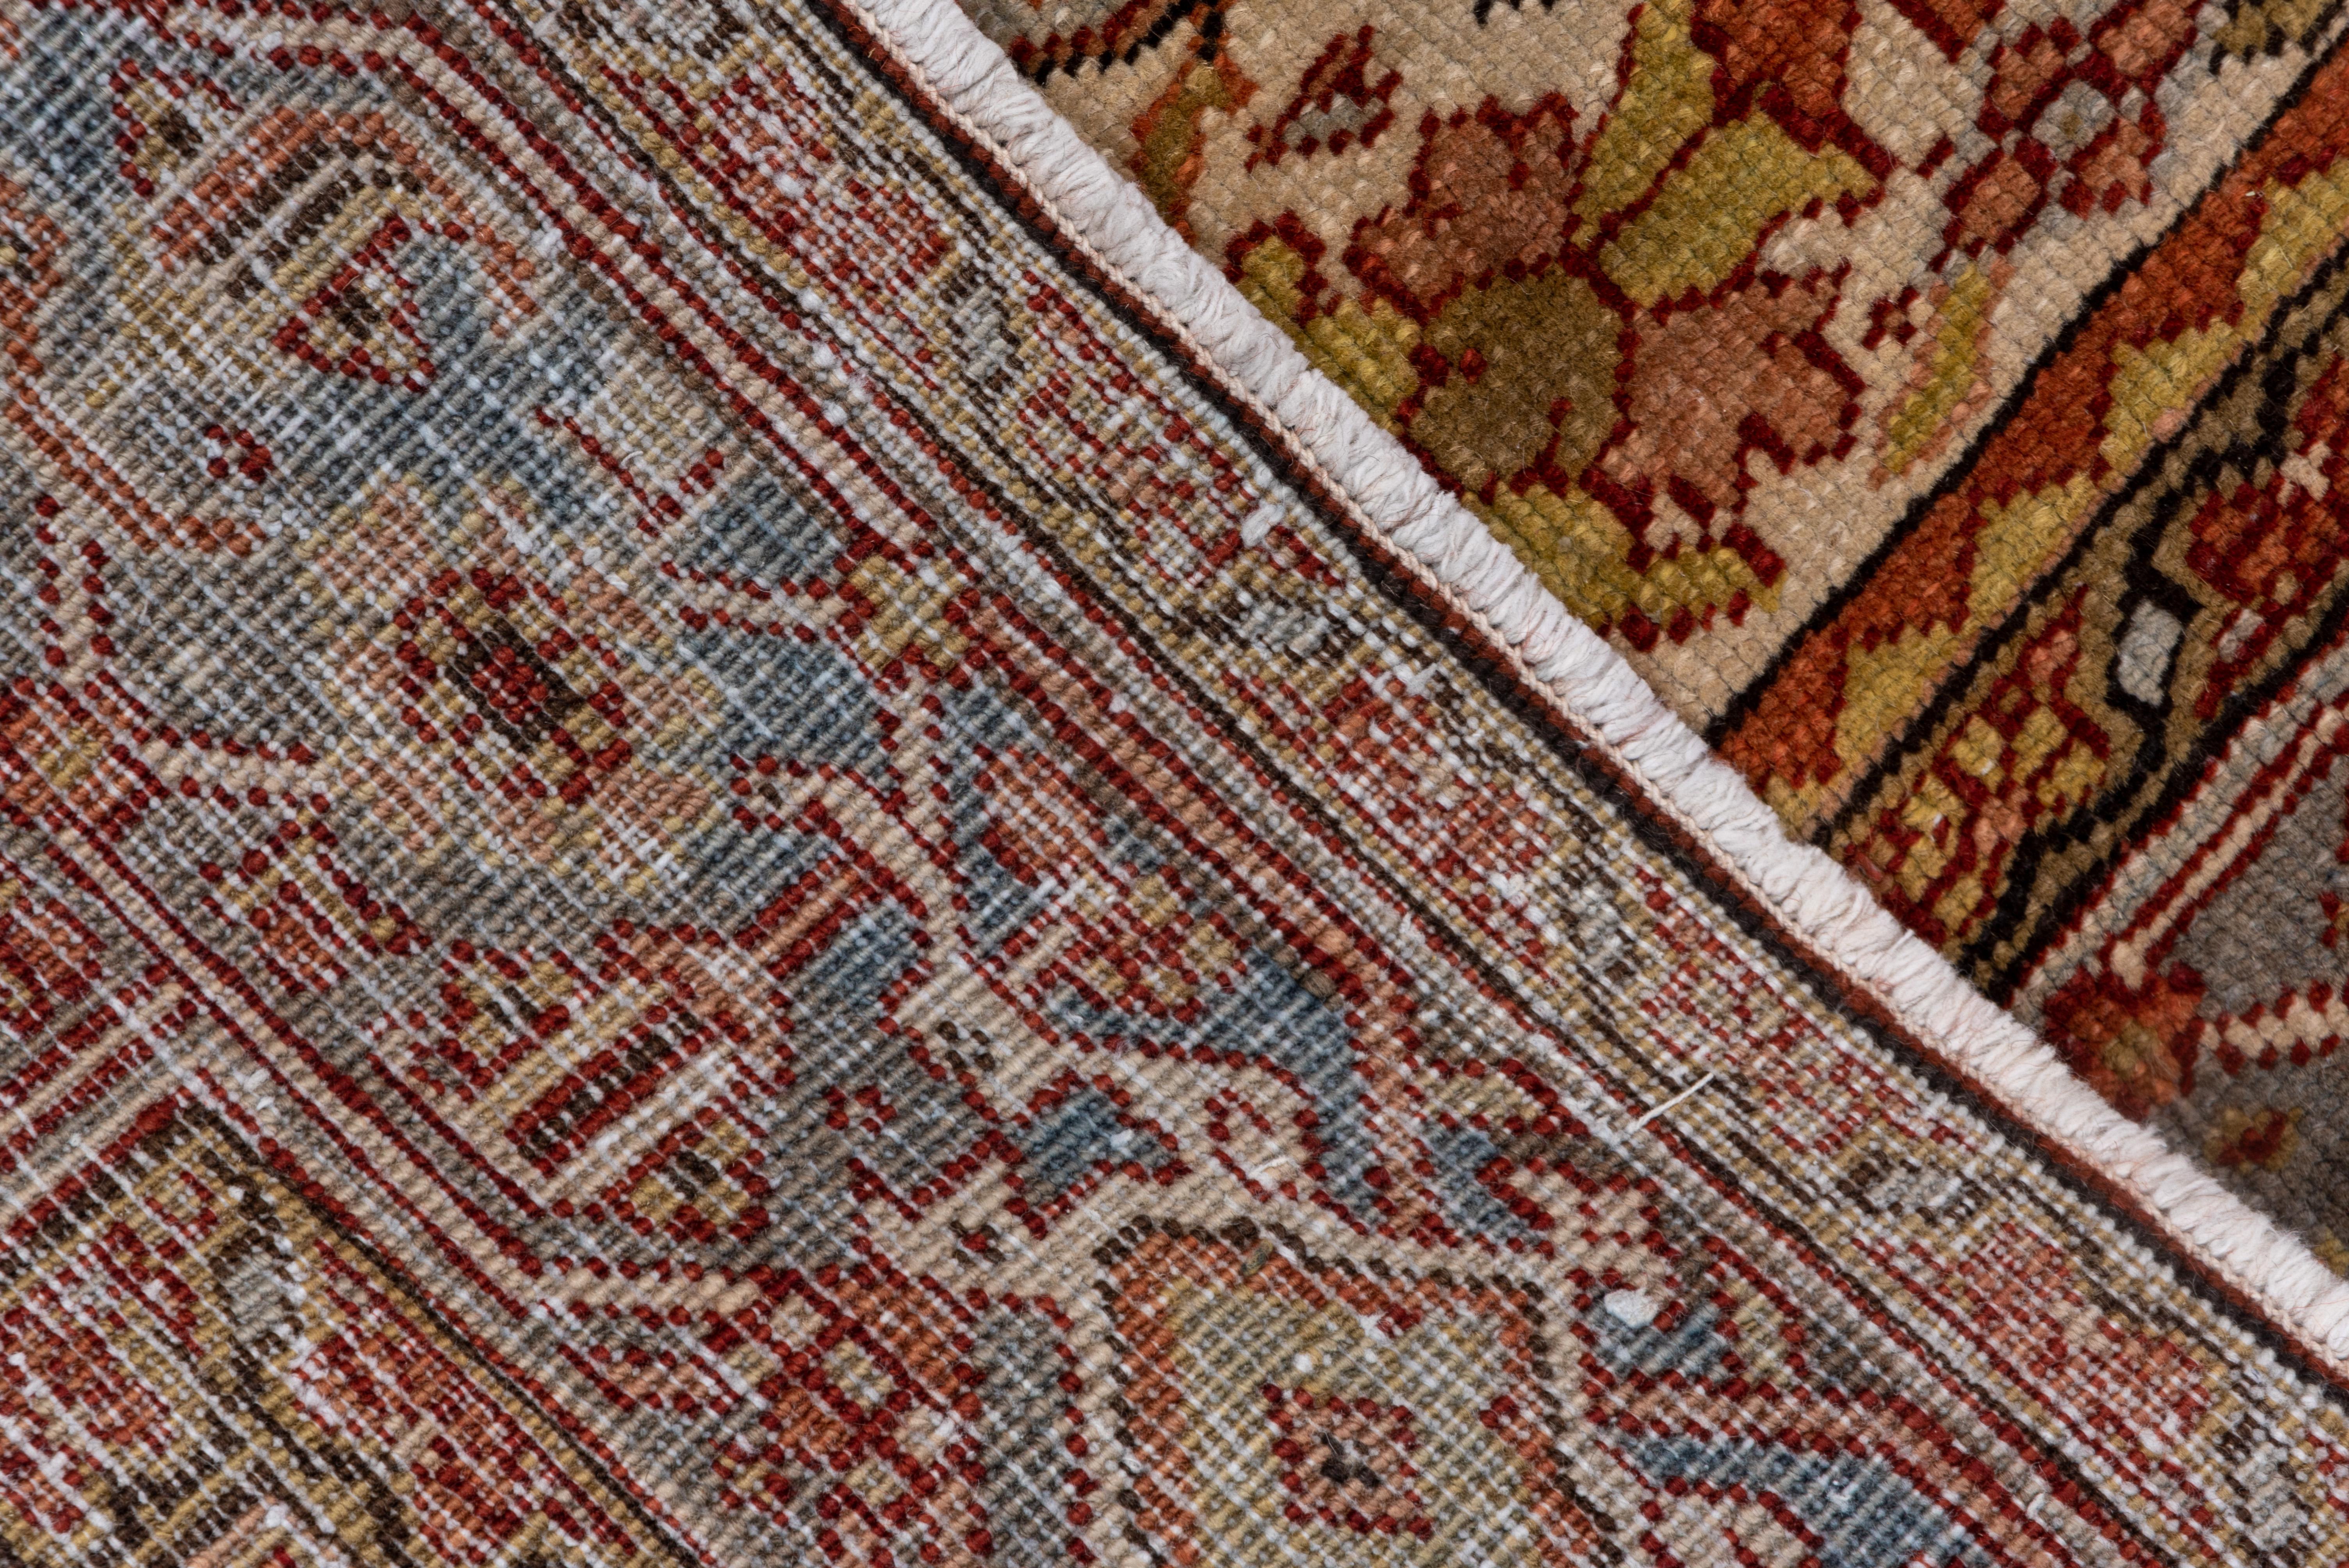 Heriz rugs are woven in the Northwest region of Iran. They’re known for their durable wool quality, and geometric designs. They have a heavy influence of the geometry of Caucasian rugs of Caucasus which is just North of Iran. All Caucasian rugs are